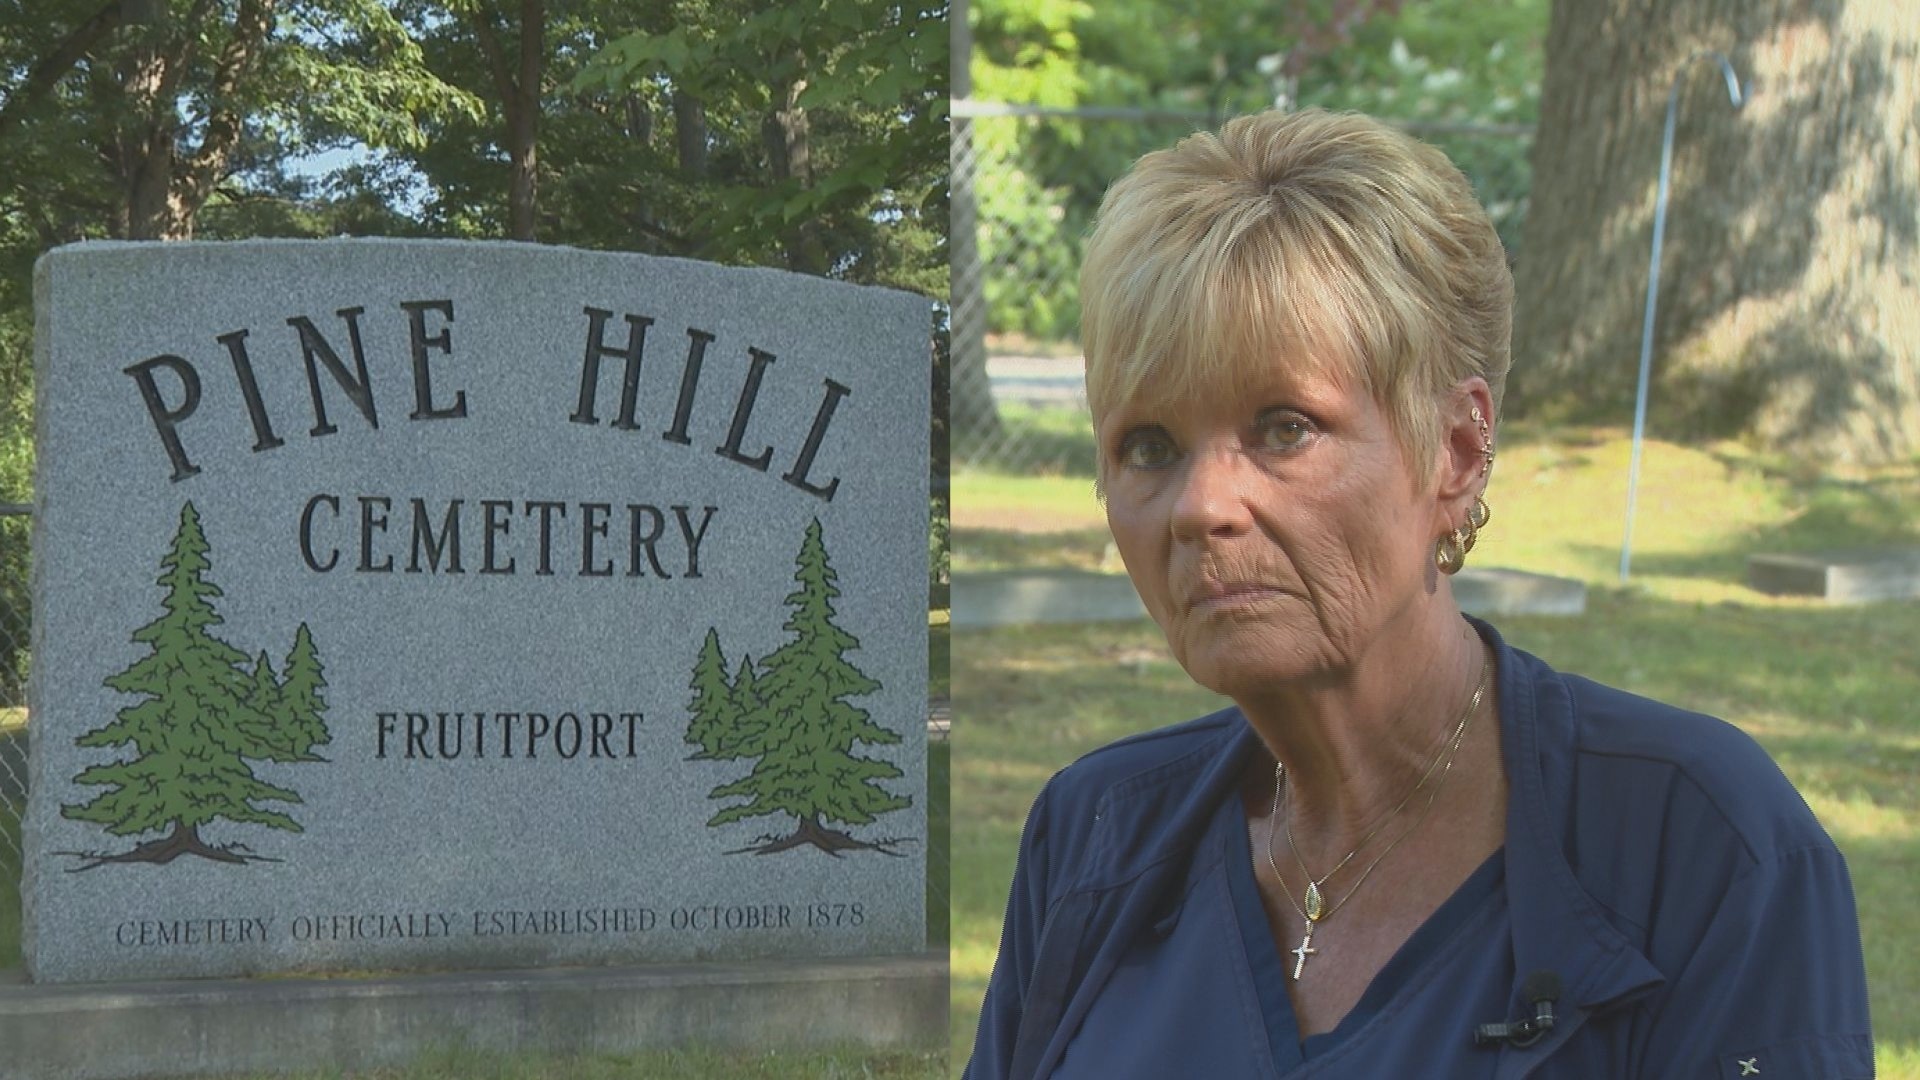 They claim hundreds of other plots were 'reclaimed' under the same law. Cemetery officials say they did nothing wrong.